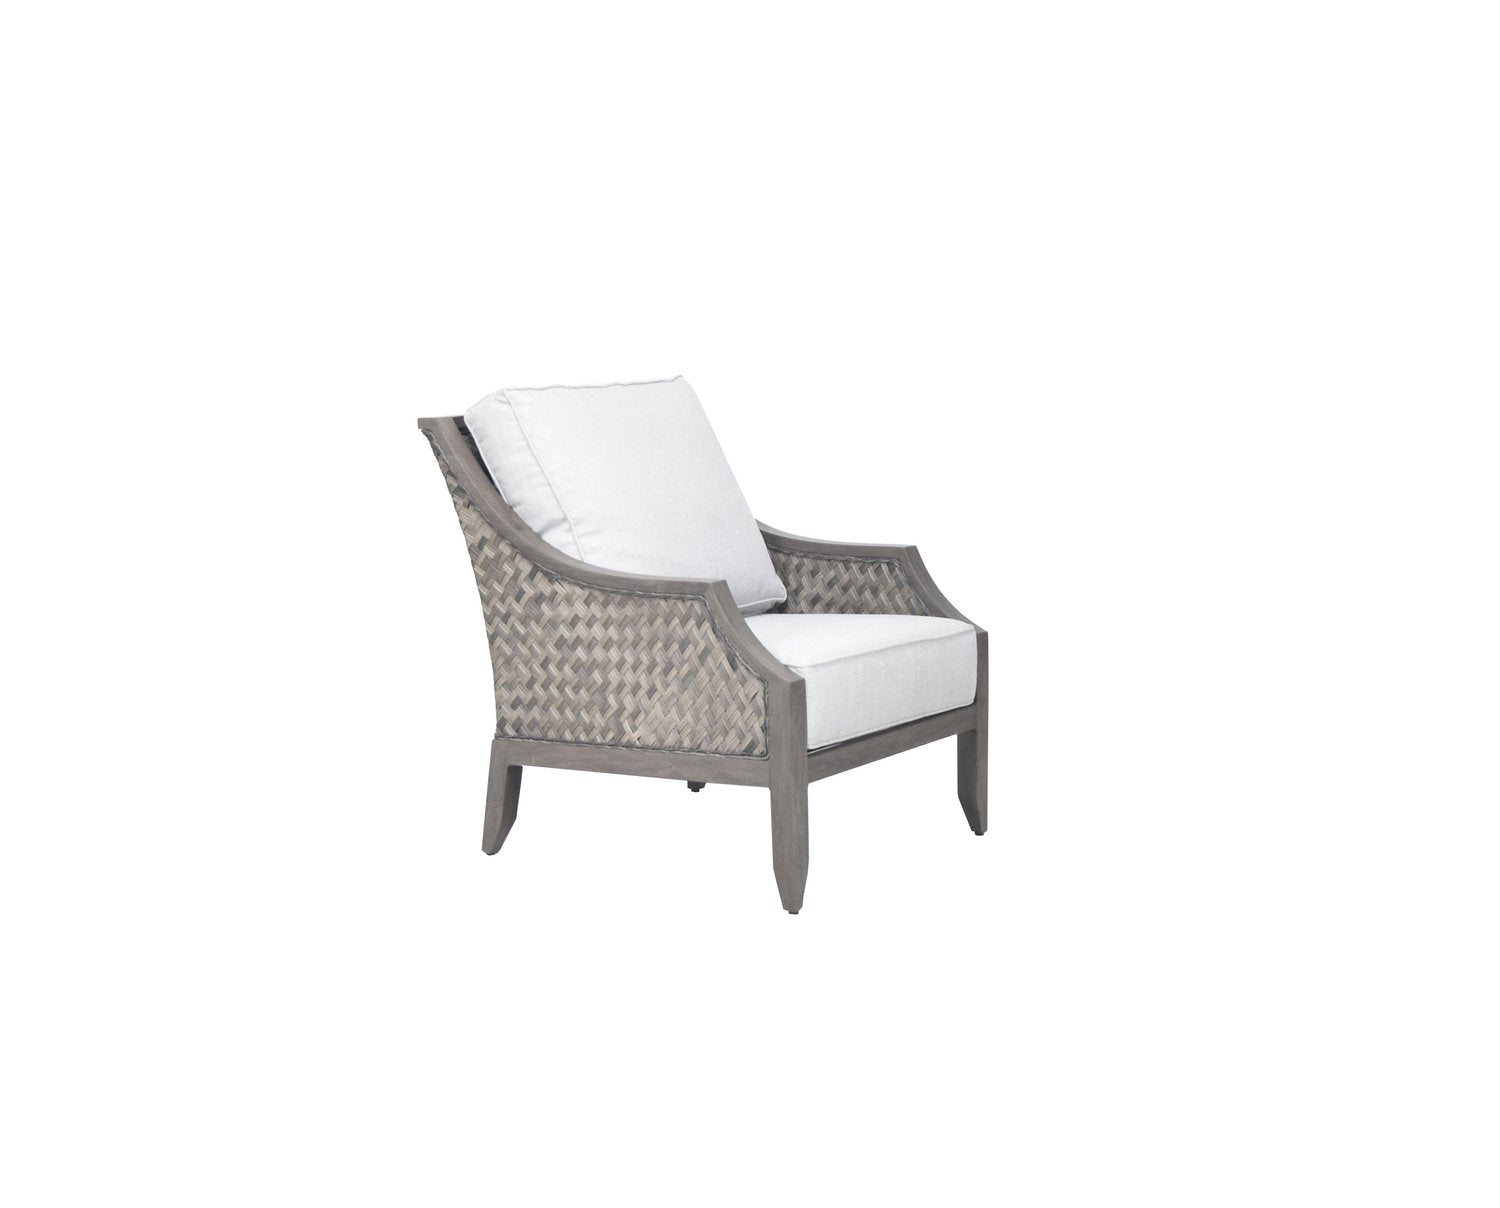 Vieques Lounge Chair By Patio Renaissance